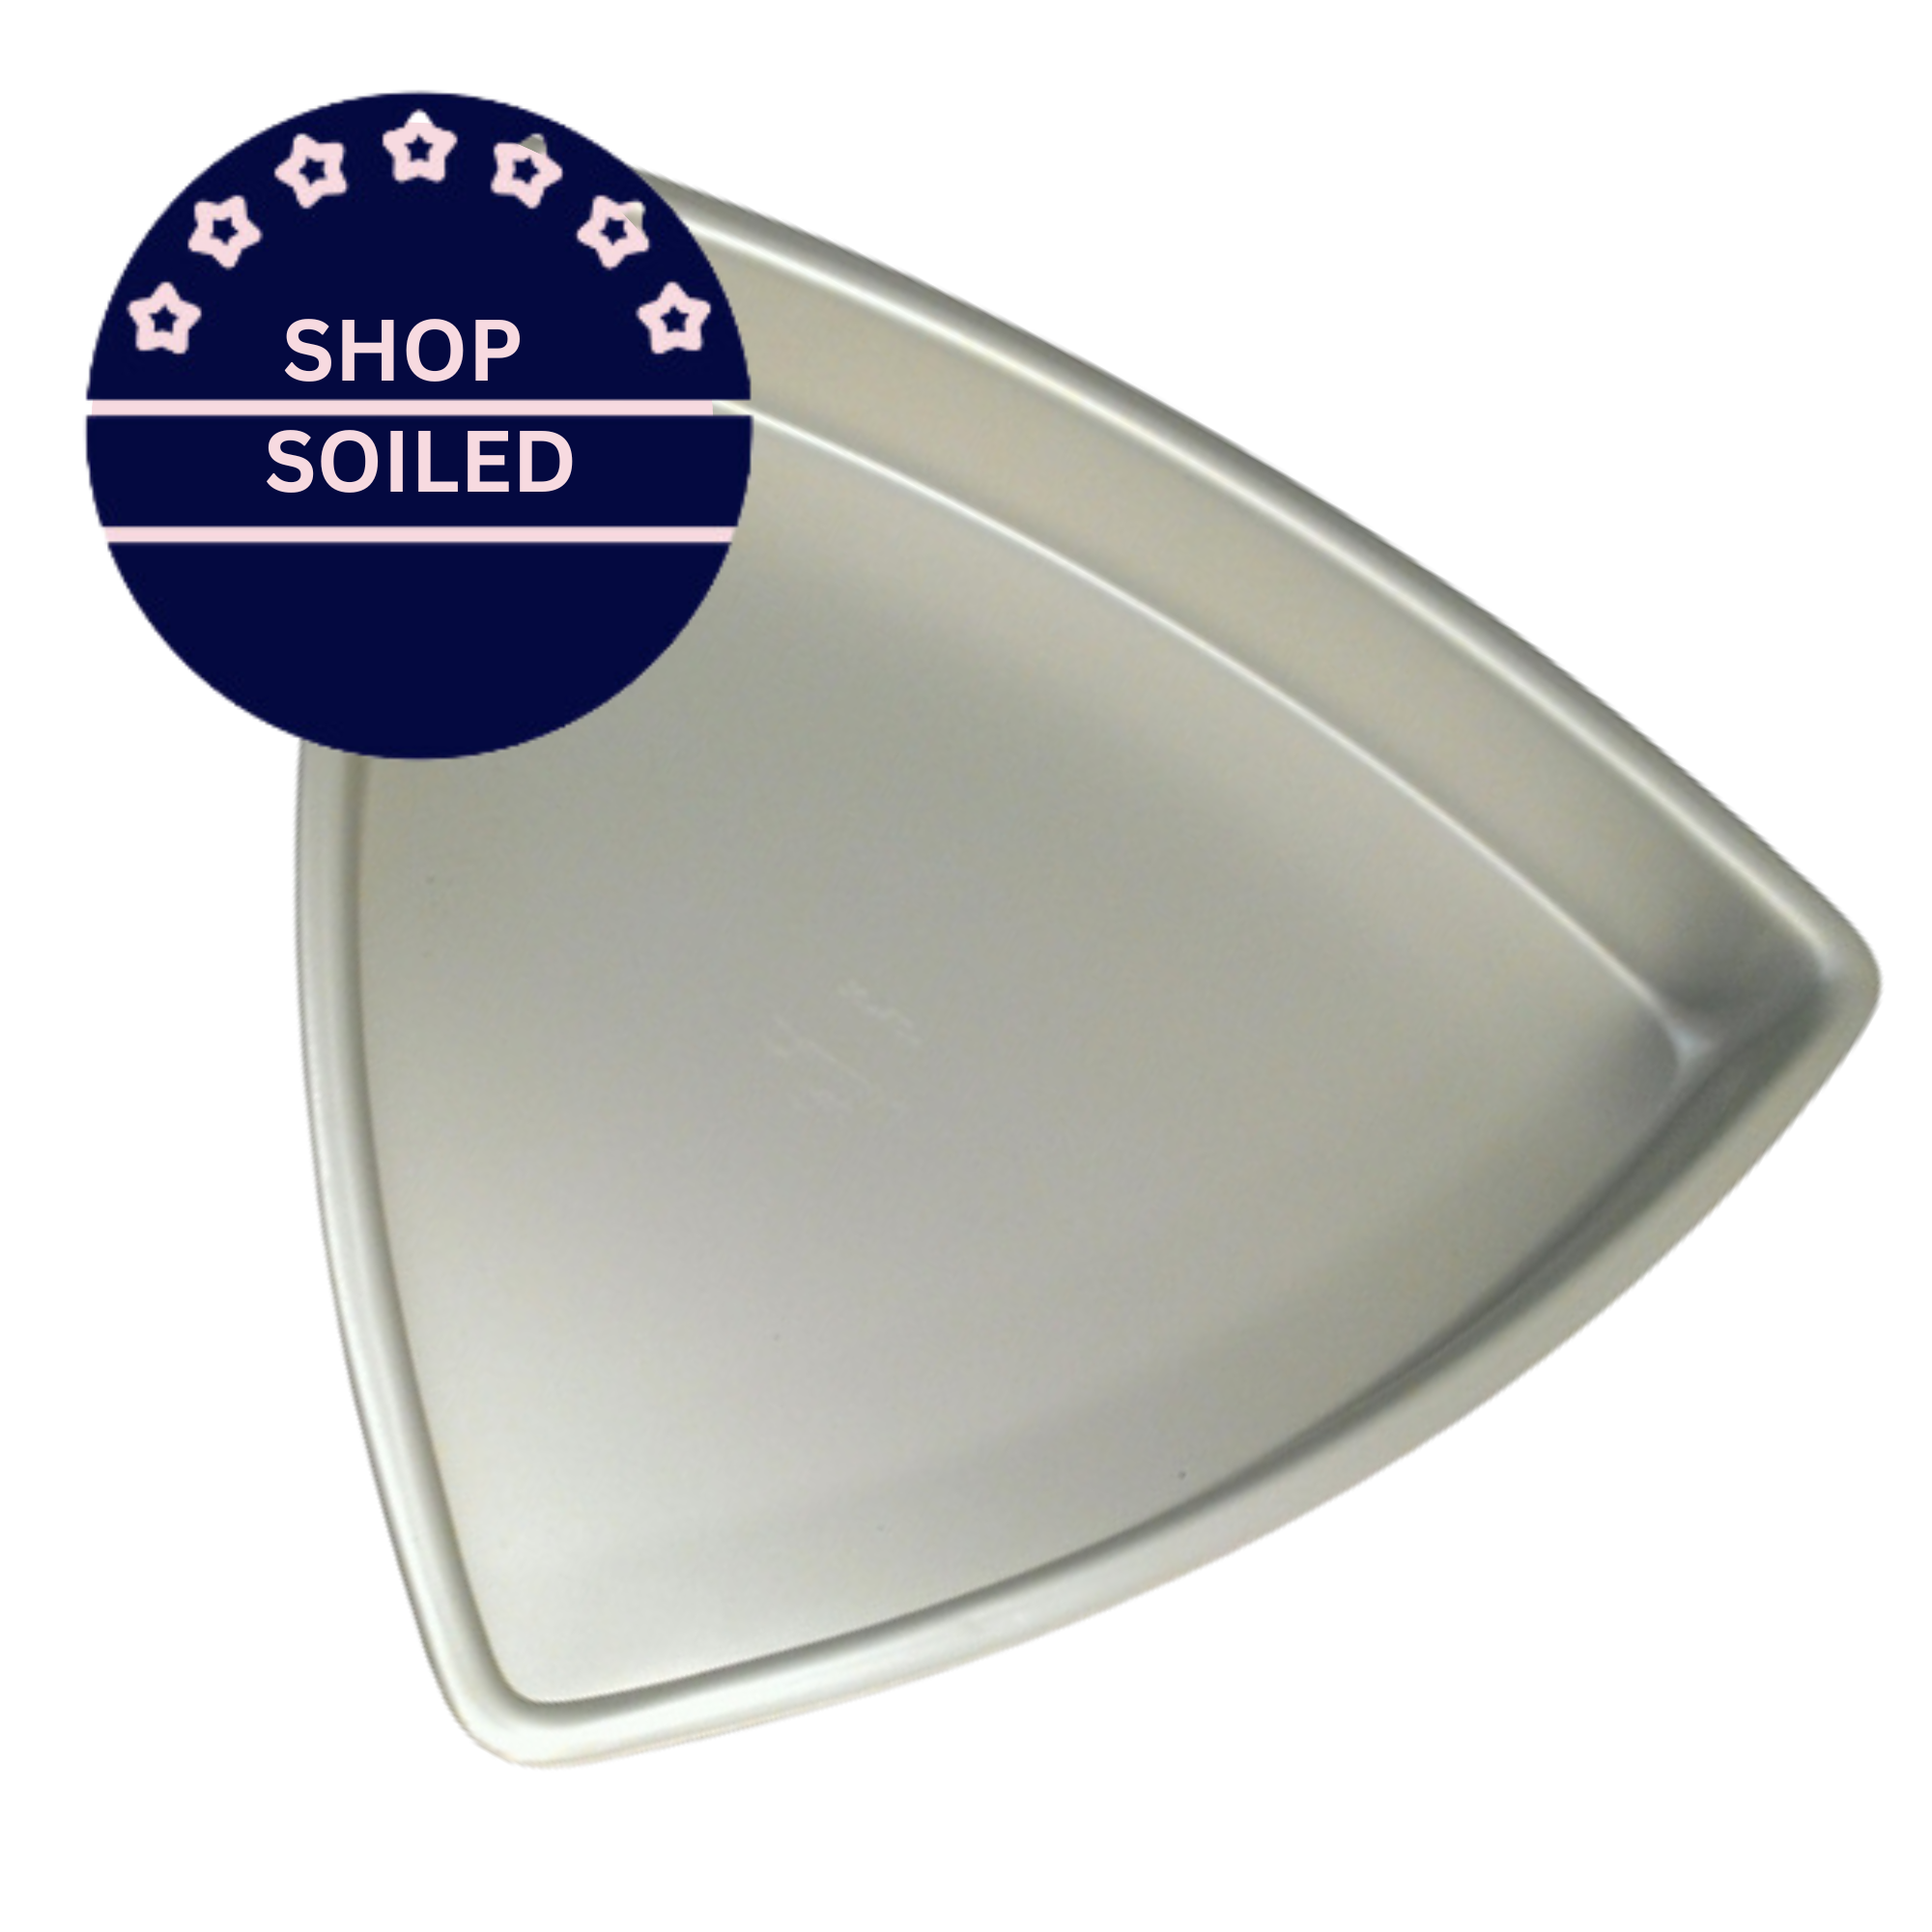 SHOP SOILED - Fat Daddio's from Silverwood Professional Silver Anodised Baking Tin Pan - Concave Triangle - 8" x 3"